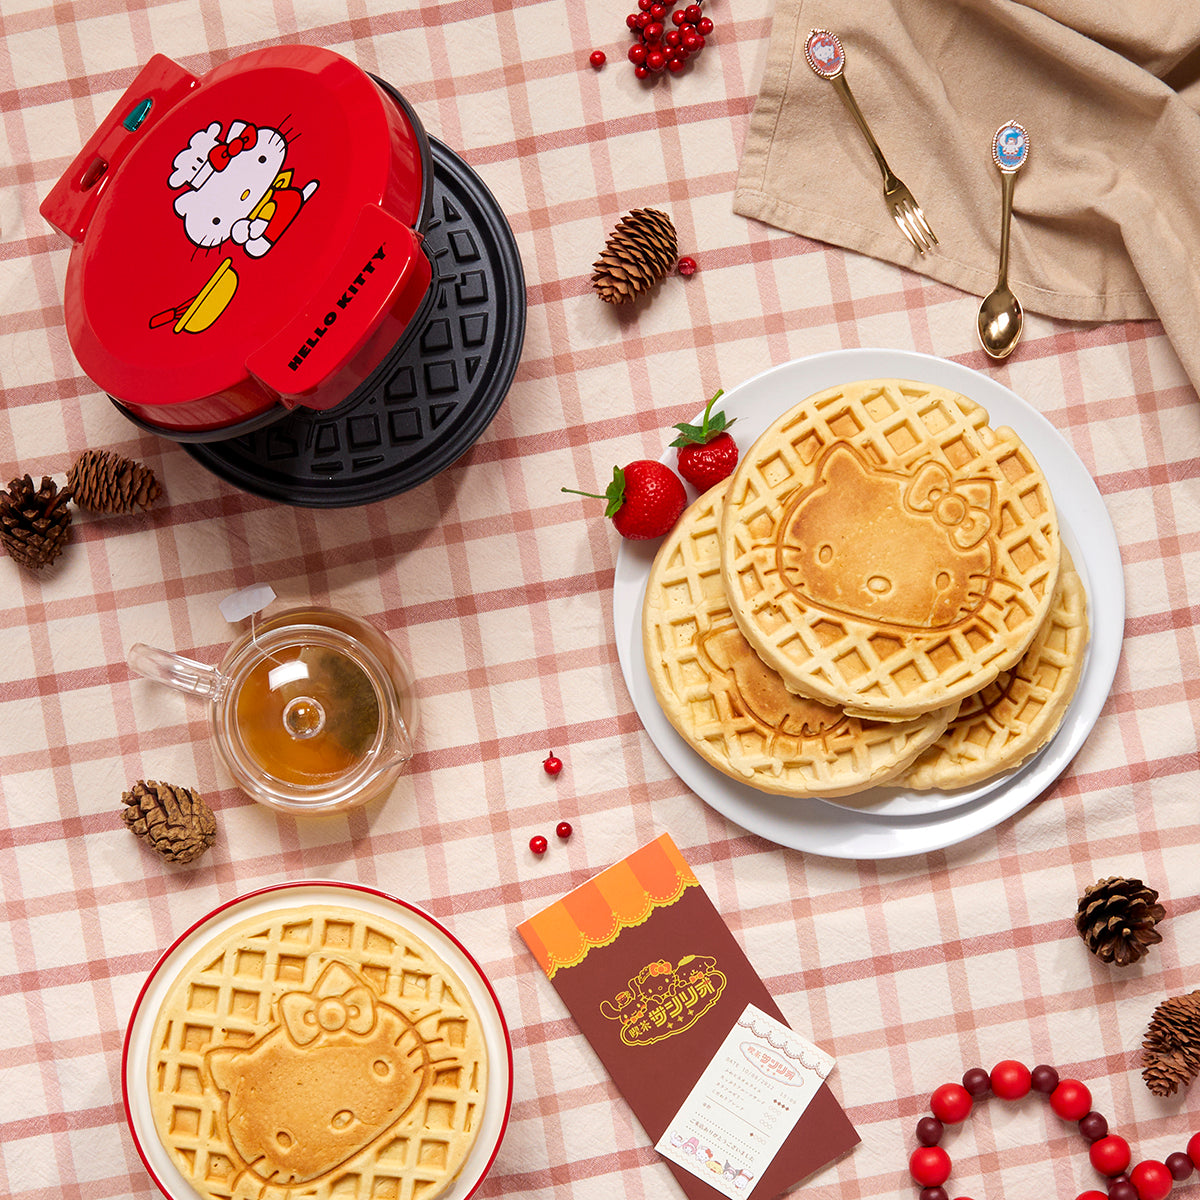 Deluxe Mini Waffle Maker - Apple Red